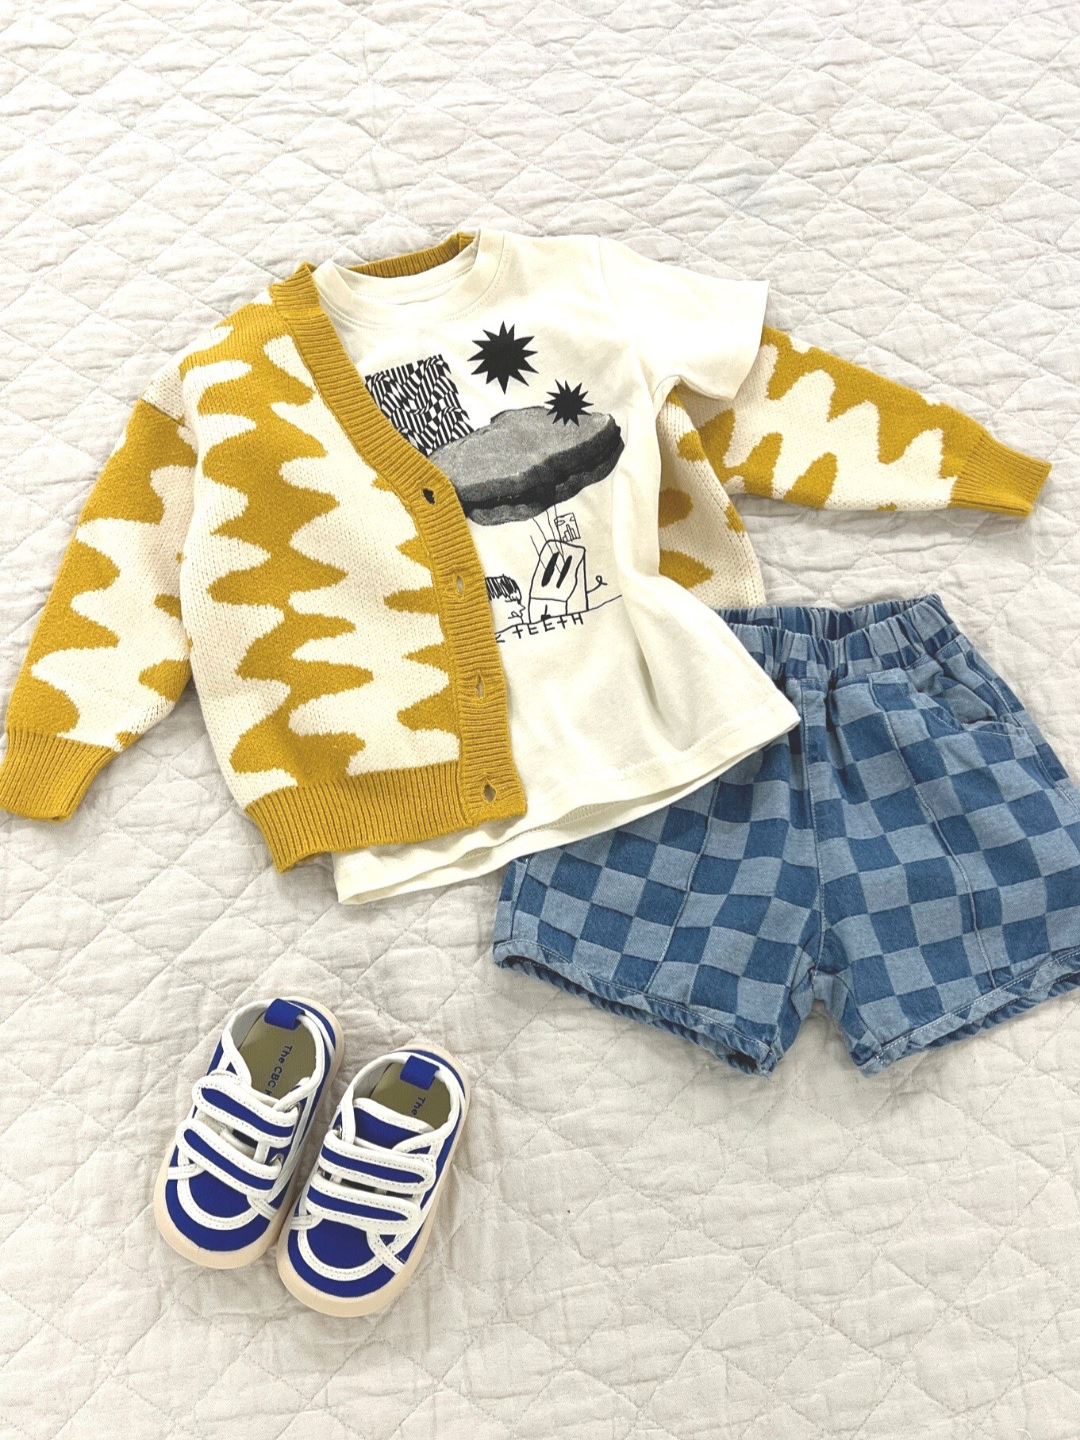 A child's outfit laid on a quilt showing a Wavelength Cardigan in marigold over a Sandwich Tee and a pair of kids' checkerboard shorts in two shades of blue, with a pair of Bounce House Sneakers in blue with white trim